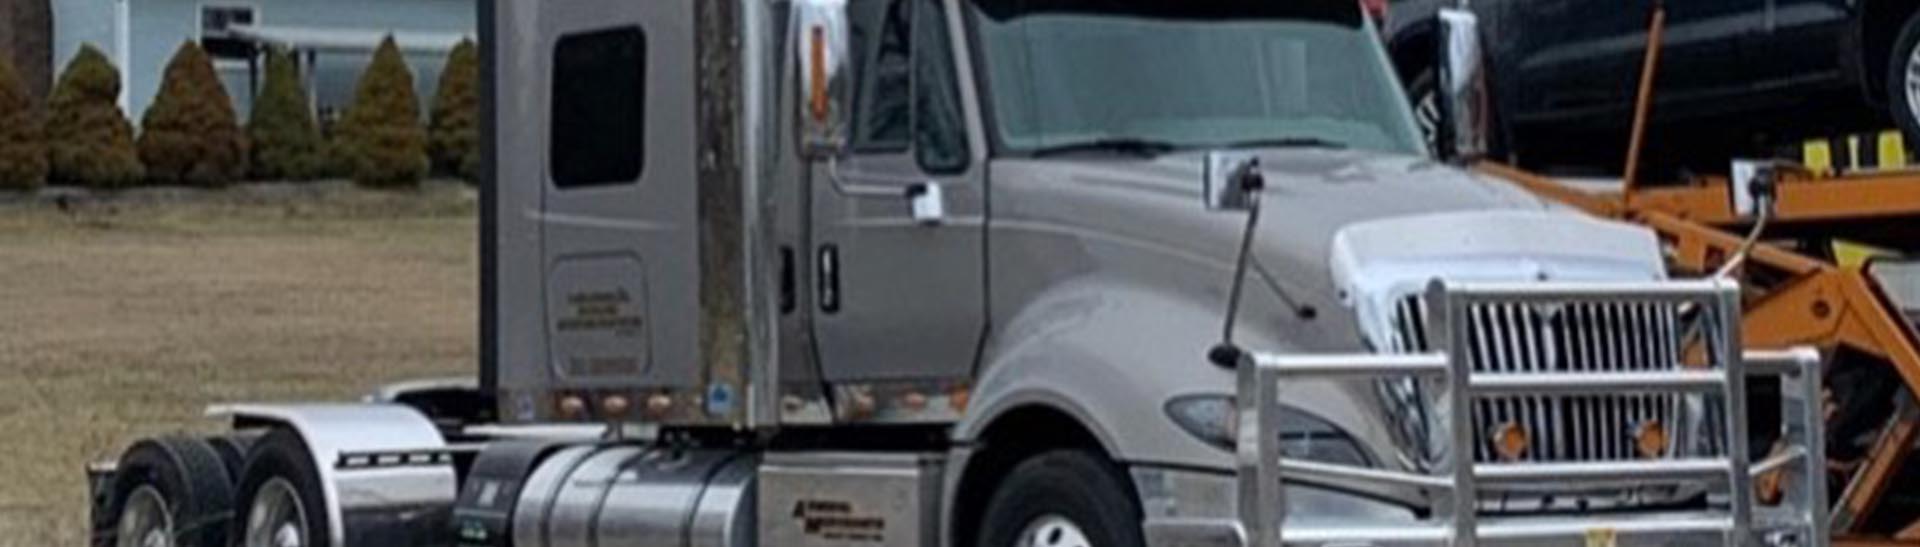 Columbus Trucking Company, Trucking Services and Freight Forwarding Services